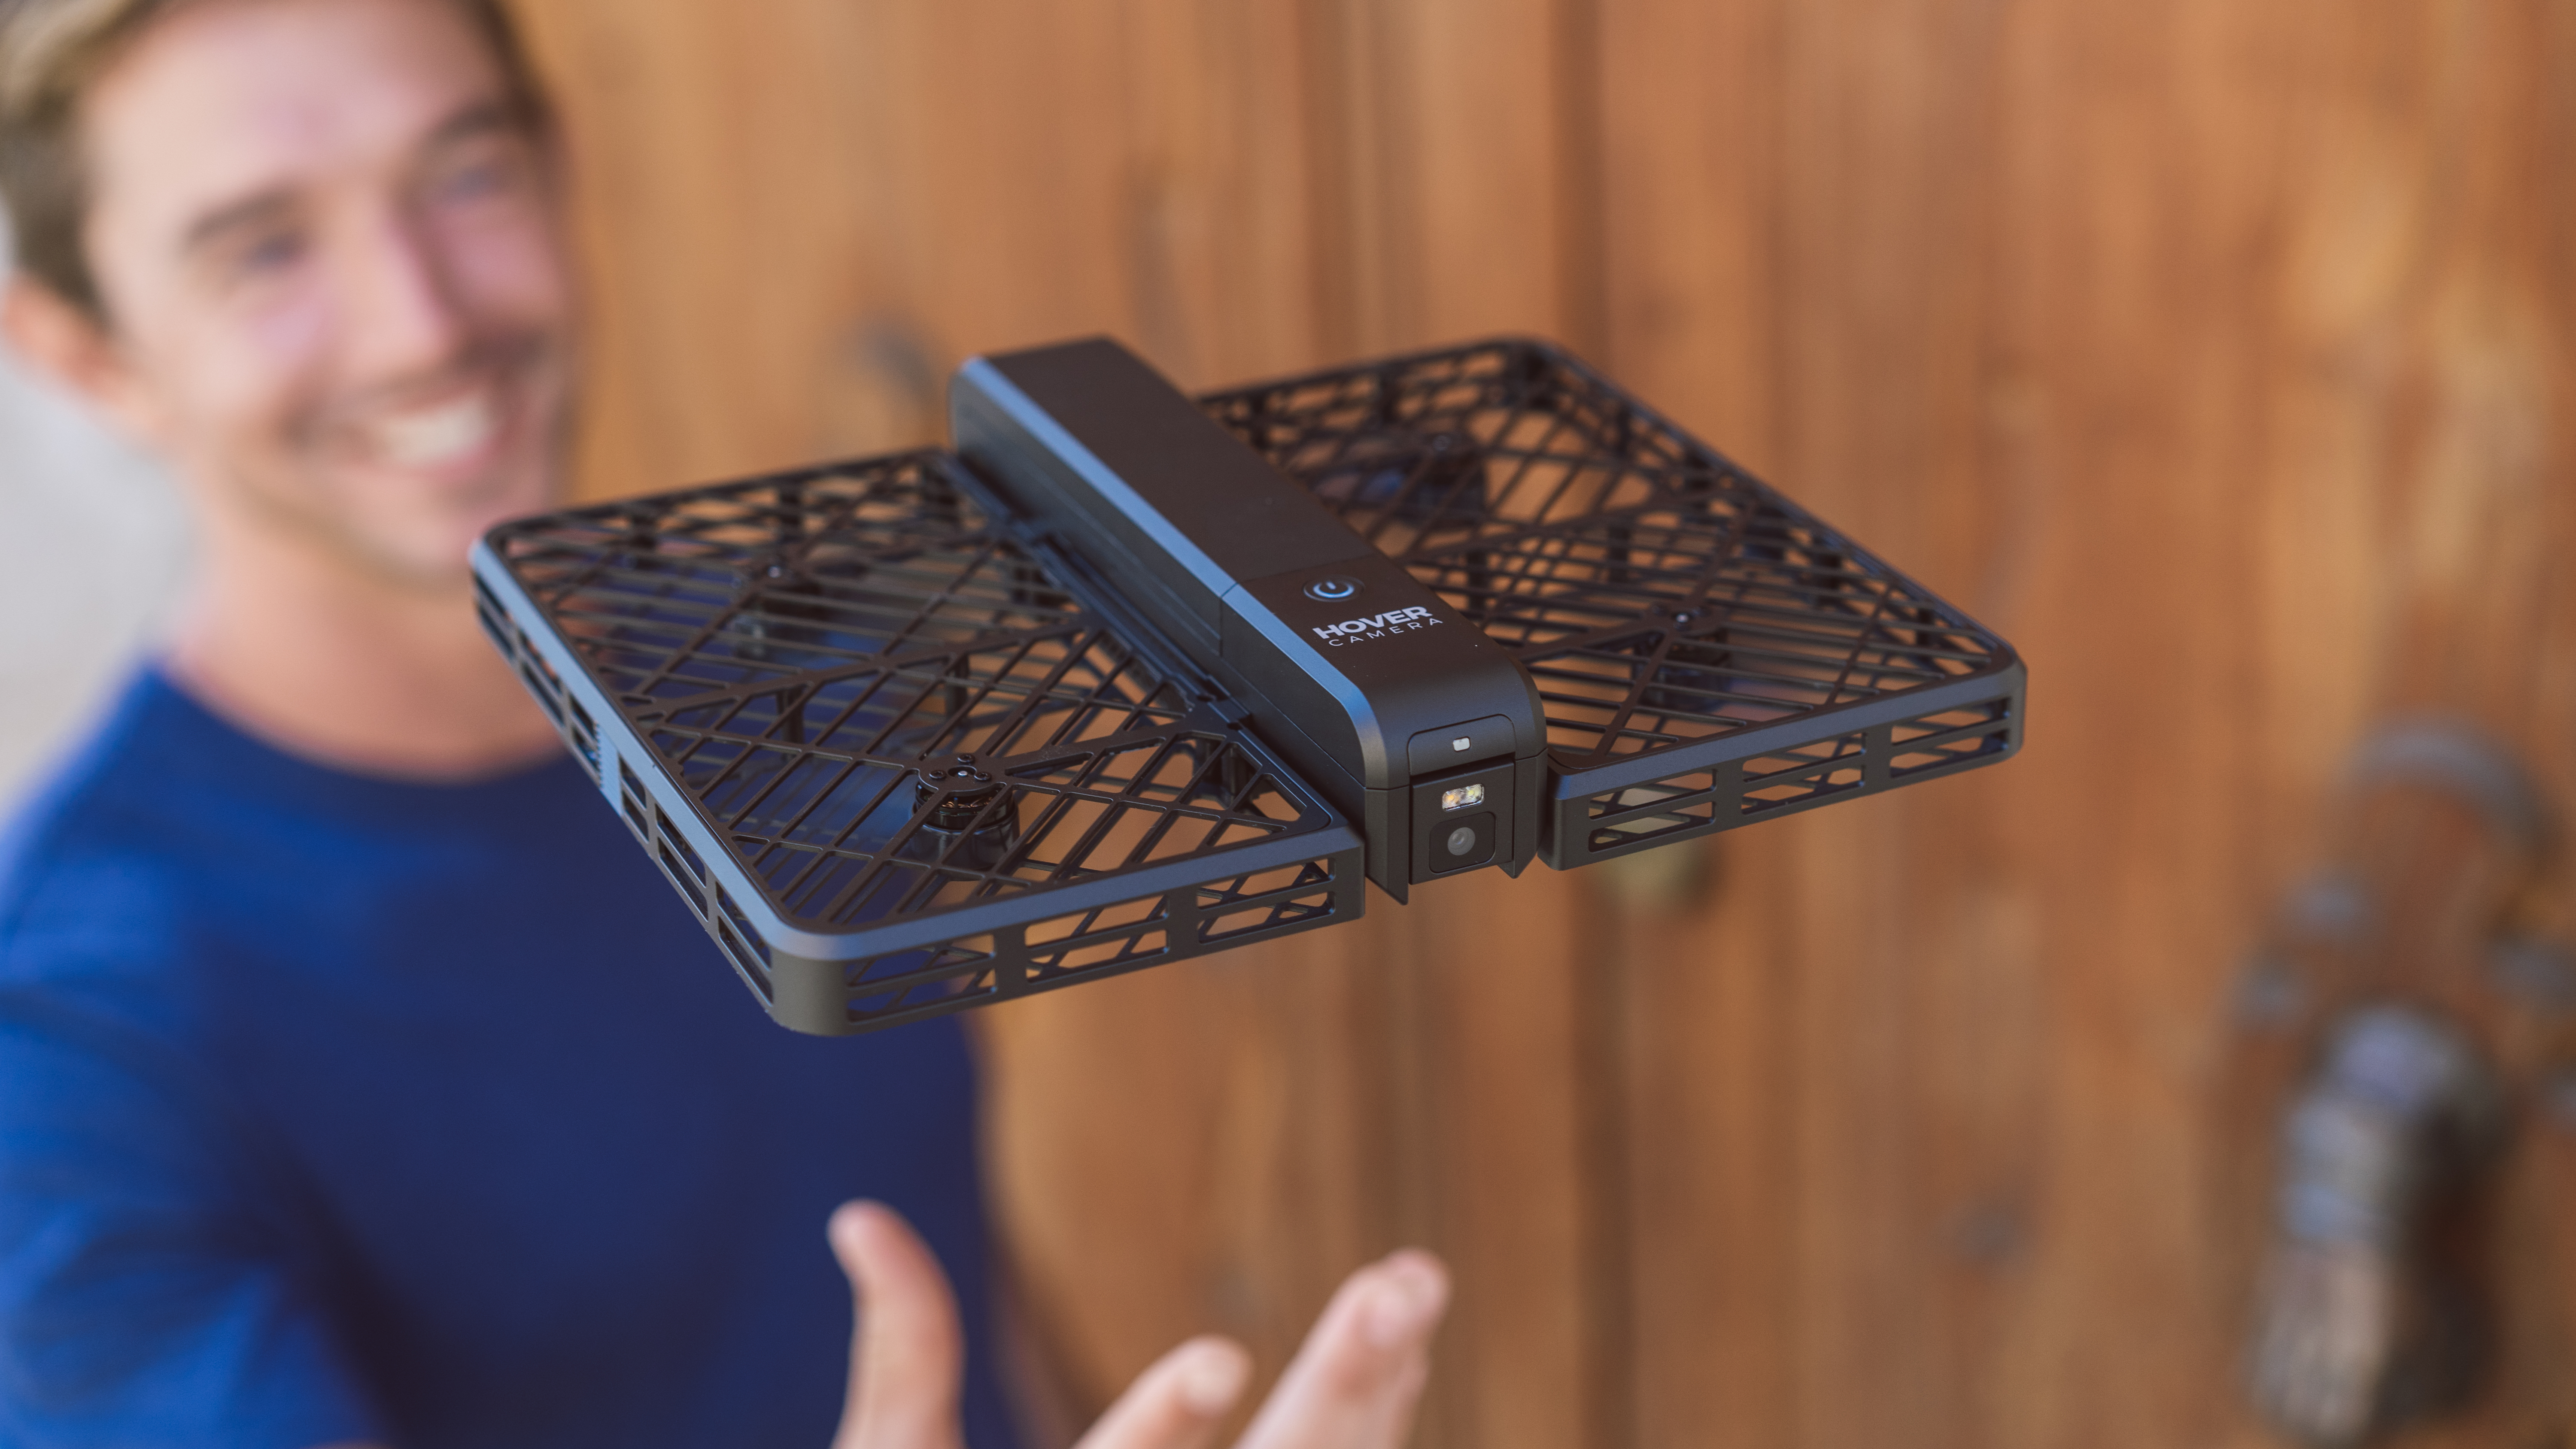 Selfie Drones Go Mainstream as Hover Camera Hits Apple Stores